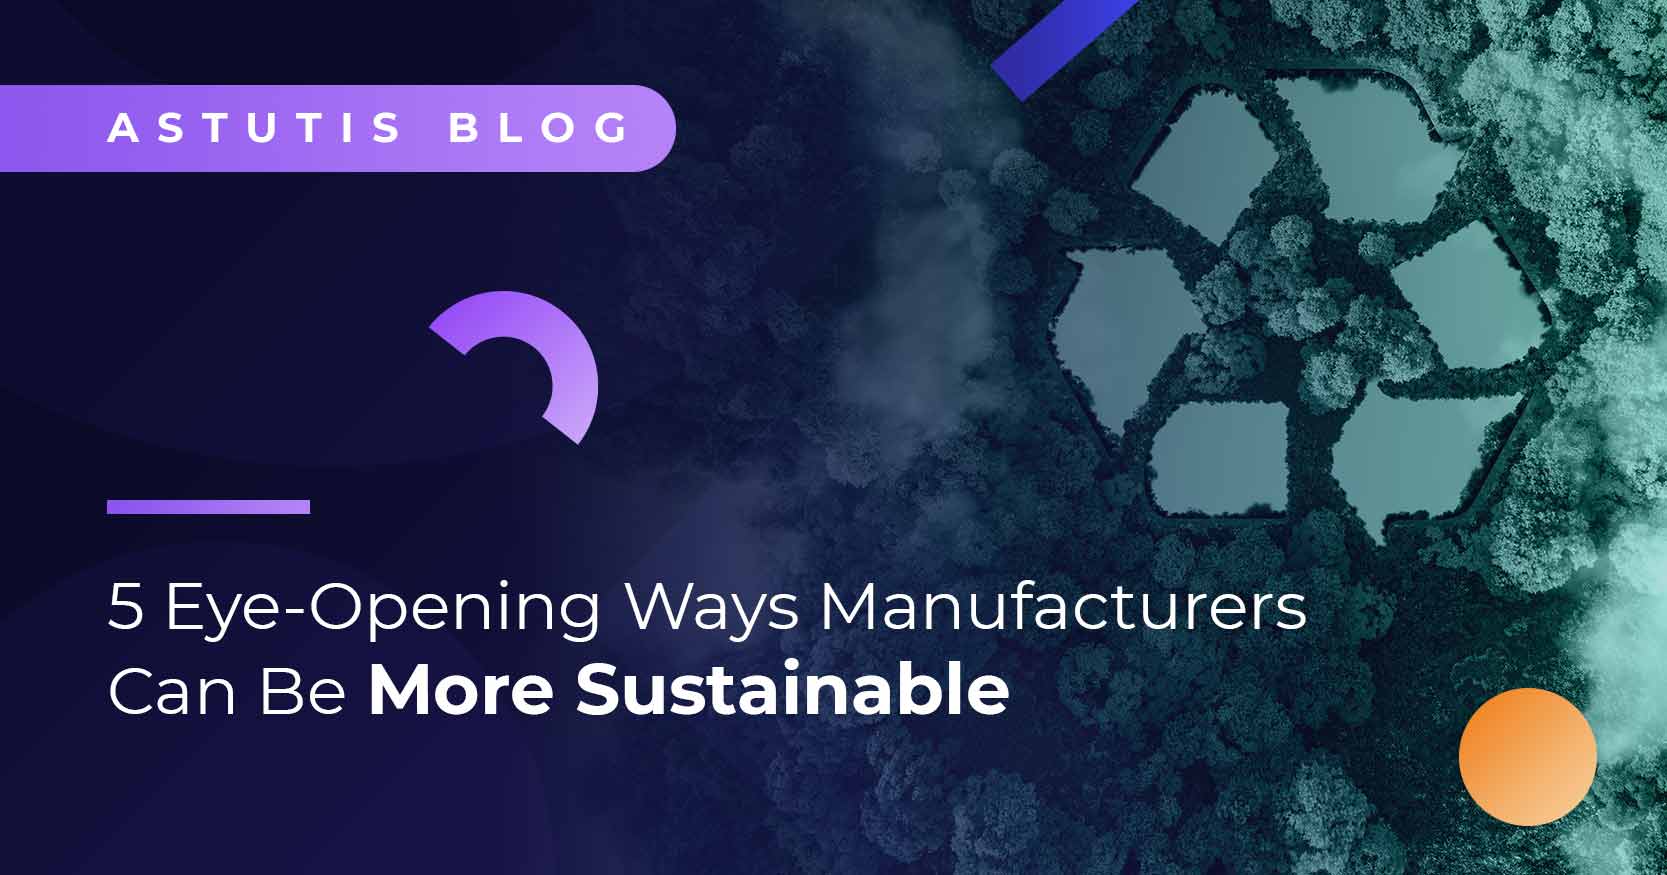 5 Eye-Opening Ways Manufacturers Can Be More Sustainable Image